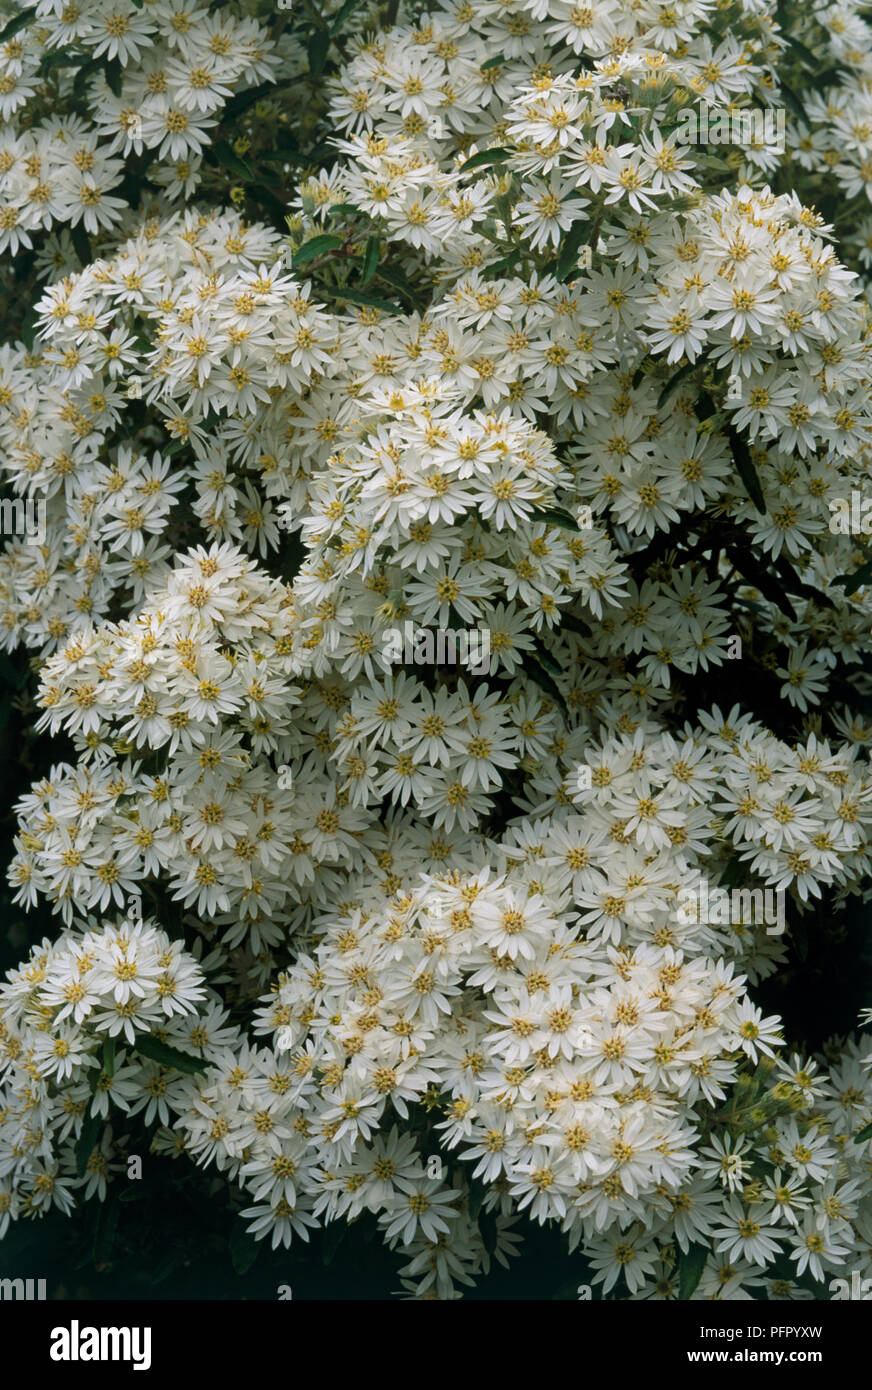 Clusters of Olearia x scilloniensis (Daisy Bush) white flowers, yellow at centre, close-up Stock Photo